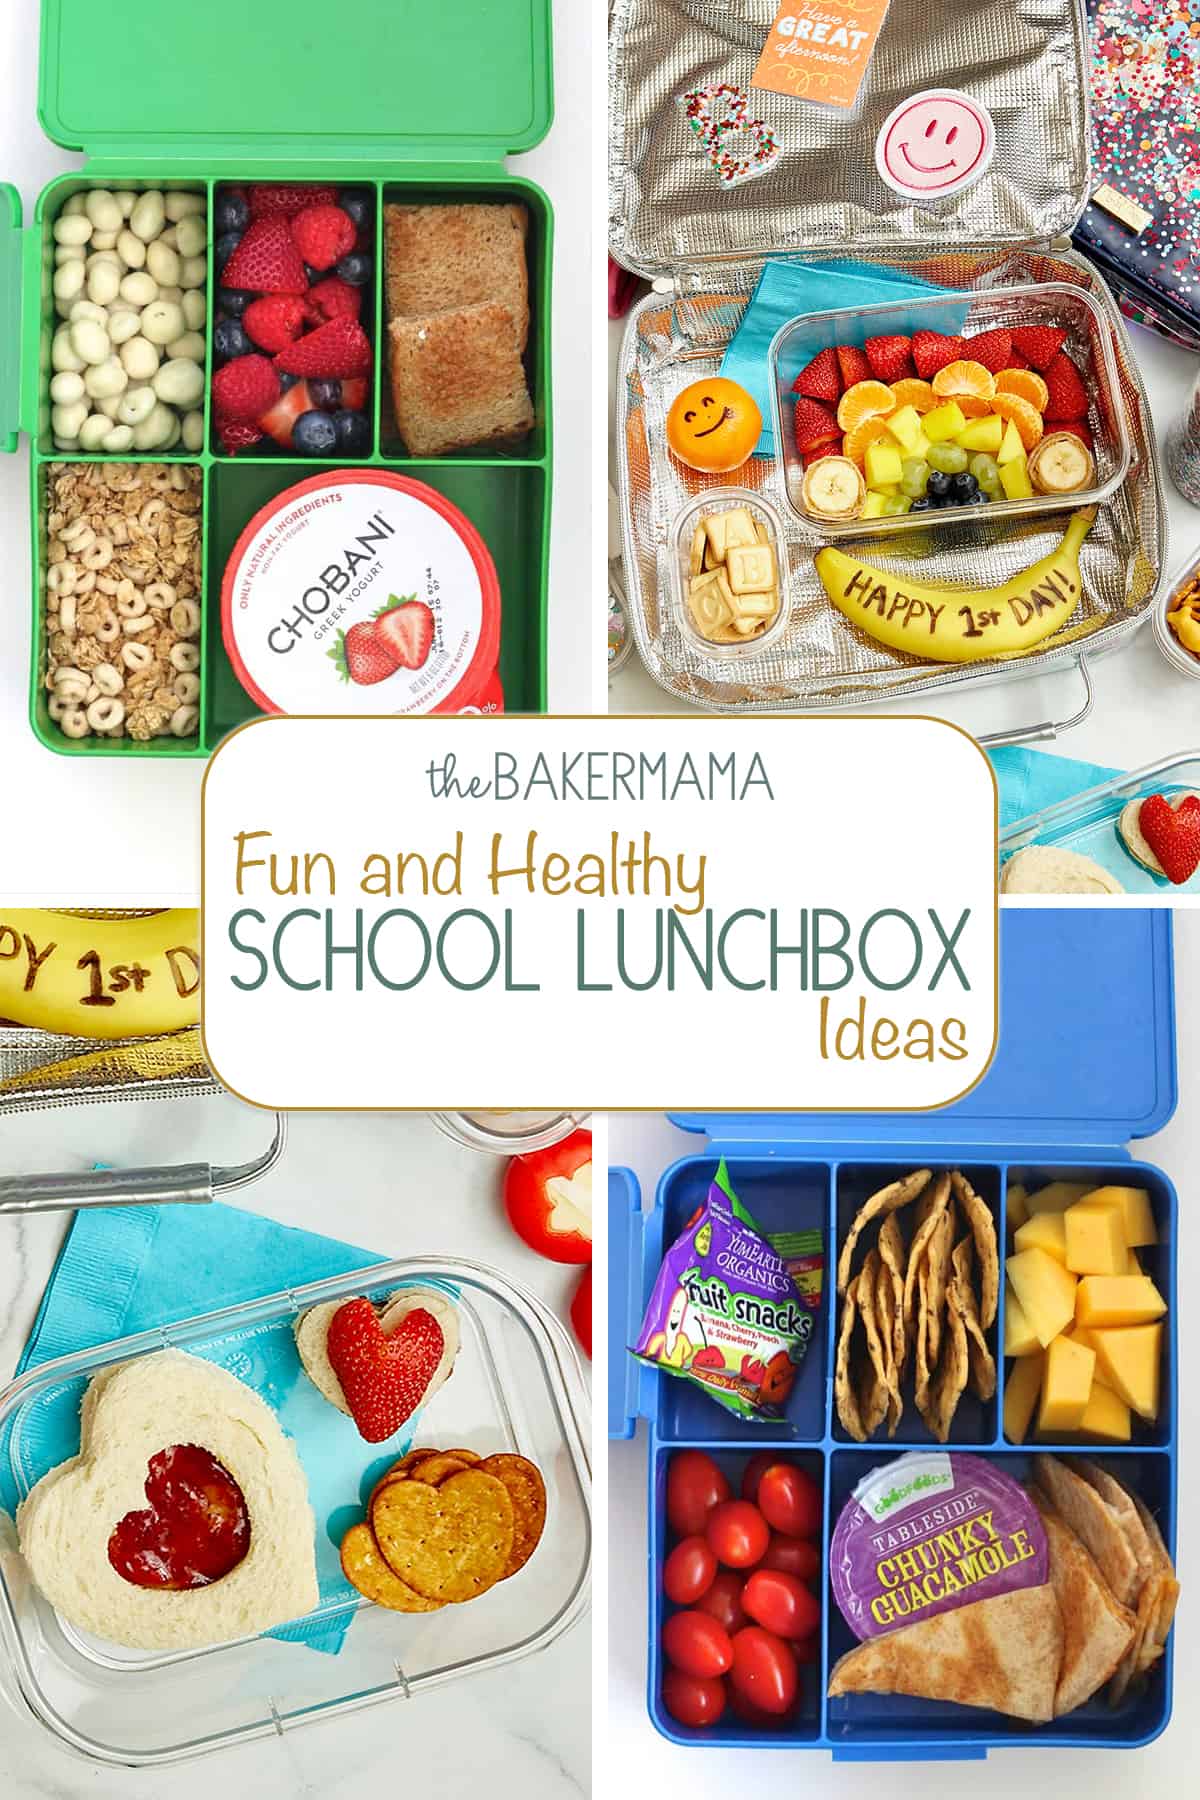 https://thebakermama.com/wp-content/uploads/2015/05/Fun-and-Healthy-Lunchbox-Ideas-Resize.jpg